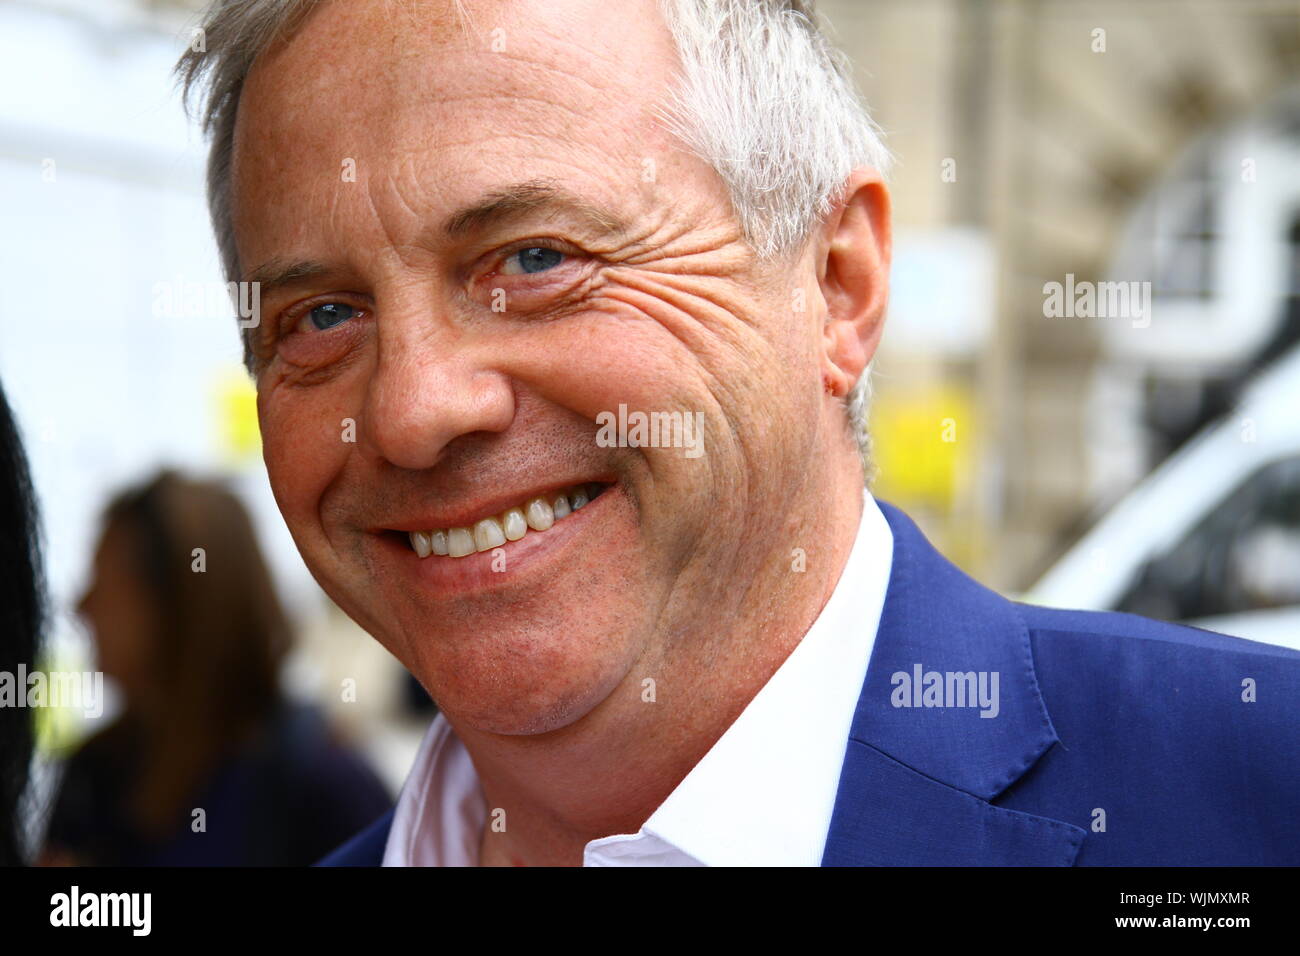 JOHN MANN LABOUR PARTY MP FOR BASSETLAW PICTURED AT COLLEGE GREEN , WESTMINSTER ON 3RD SEPTEMBER 2019. BRITISH POLITICIANS. LABOUR MPS. POLITICS. OPPOSTION PARTY. Stock Photo